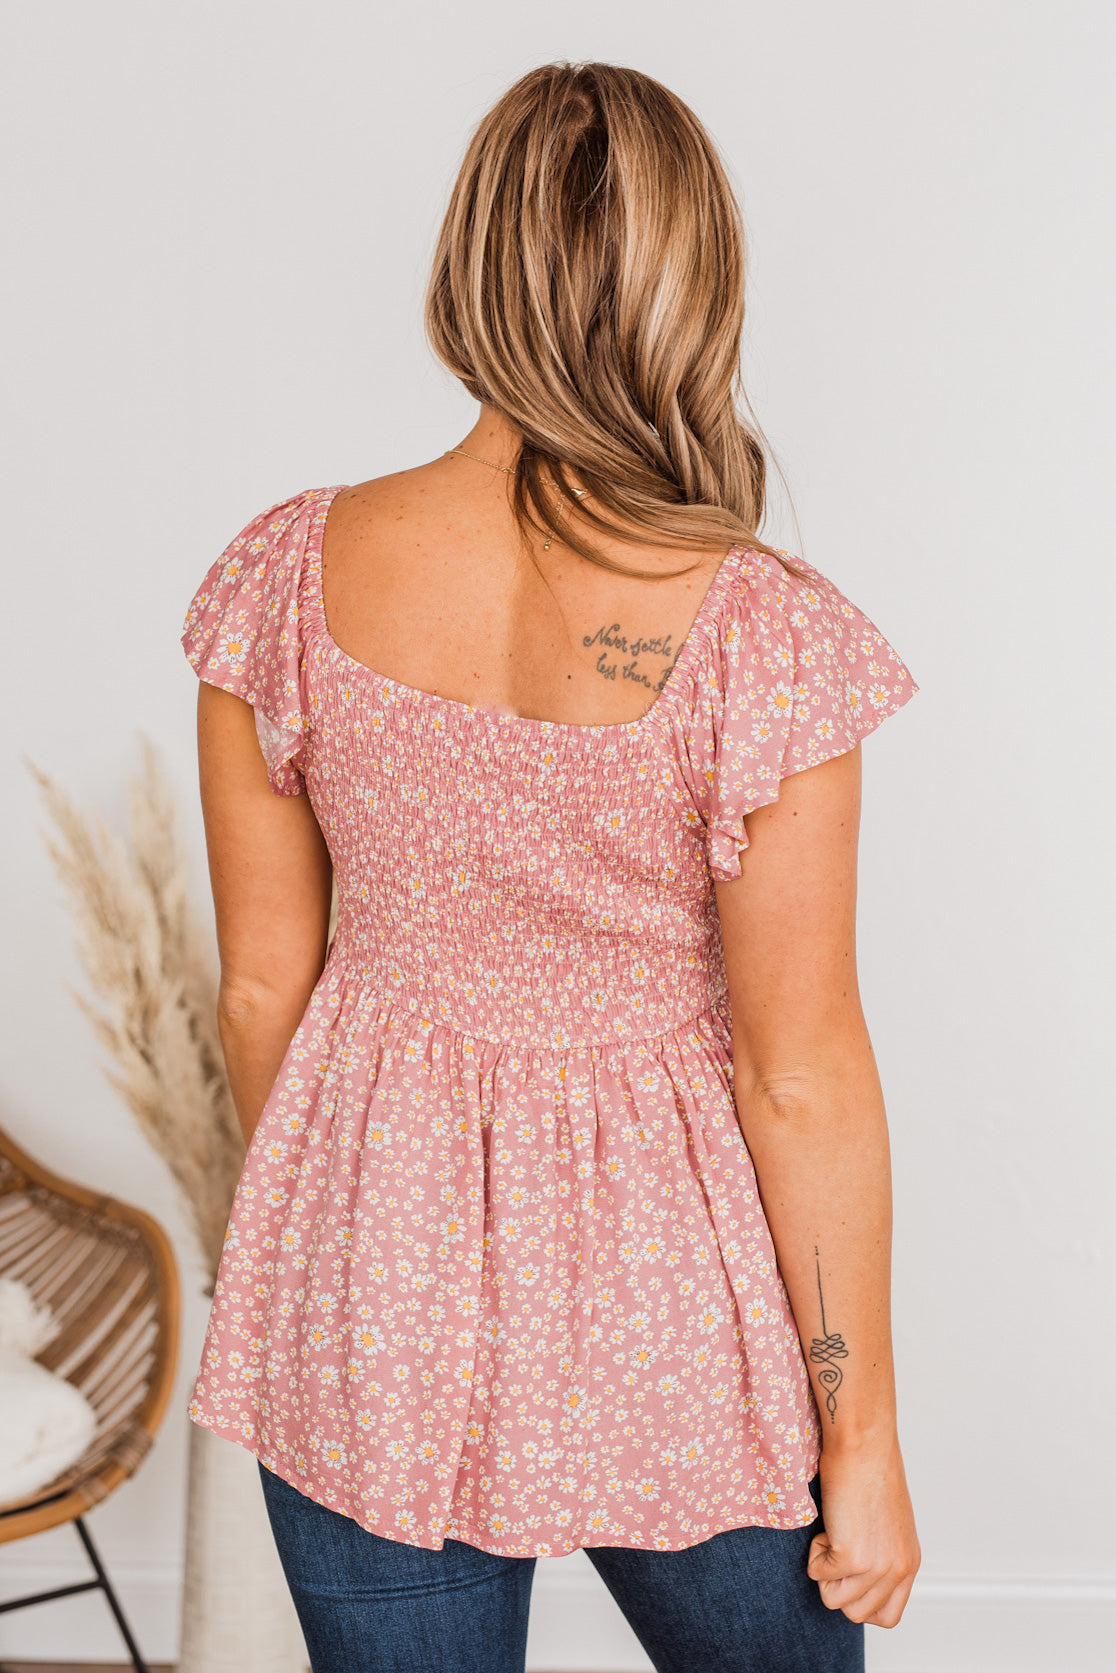 Dreaming Of Daisies Floral Top- Pink